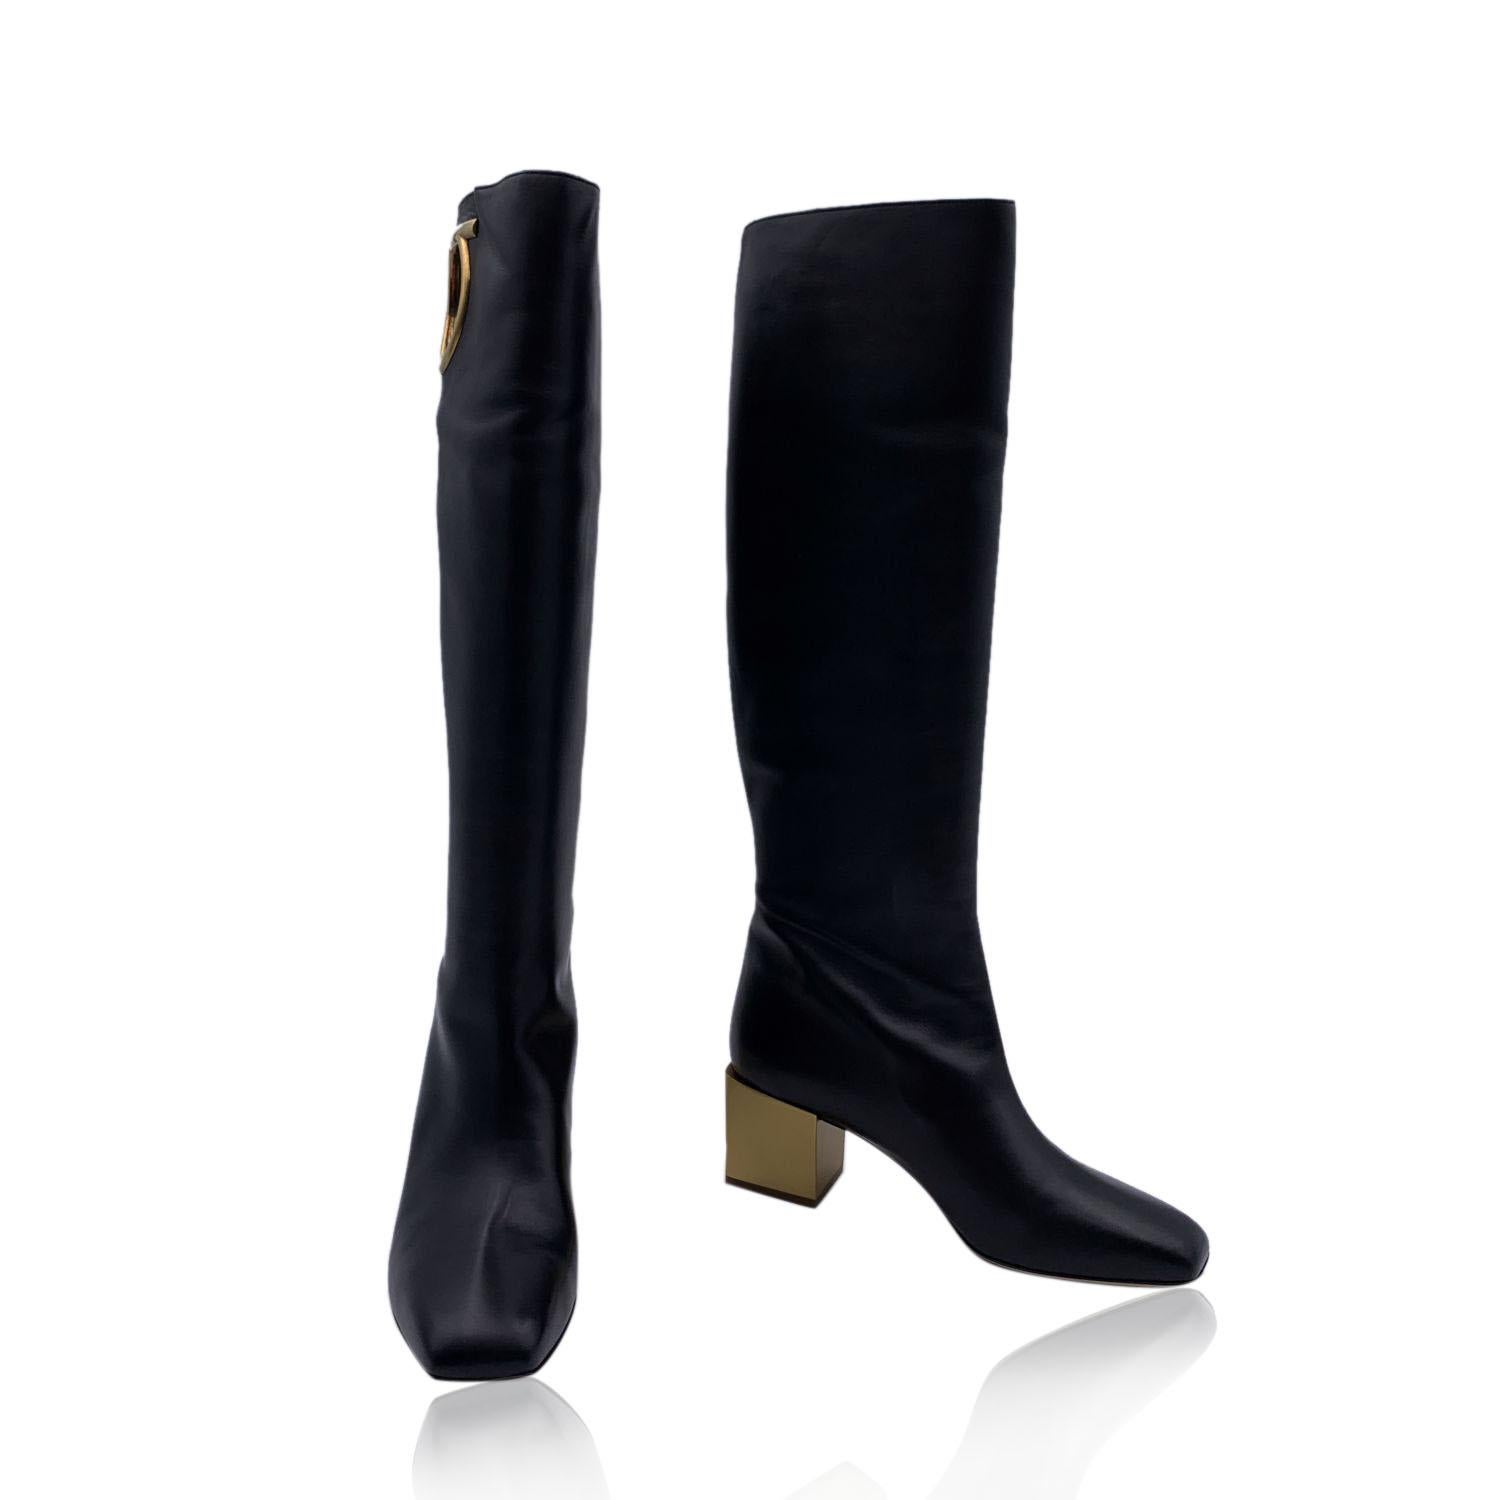 Stunning Salvatore Ferragamo Avio 55 Knee-High Boots. Crafted in black calf leather, they feature square toe, pull-on style and cut-out Gancino detail on the top. Detailed with gold-tone mirrored heels. Leather sole. Heels Height: 2 inches - 5 cm.